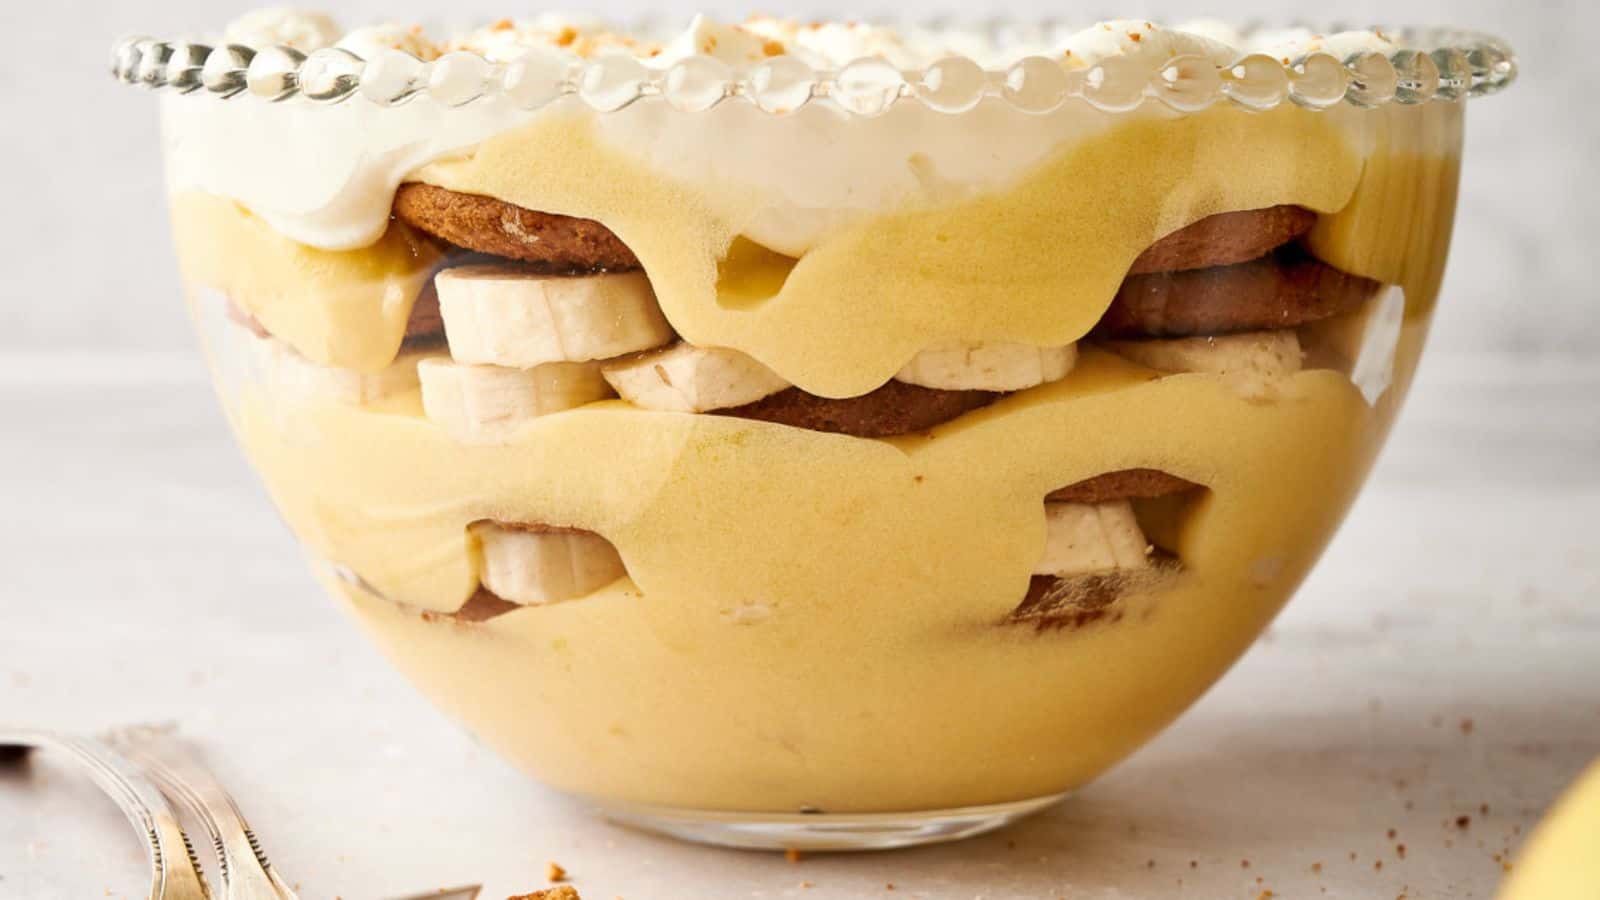 <p>Keep it simple yet pleasing with Easy Banana Pudding – a comforting dessert that captures the essence of homemade goodness without fuss. And the best part? It’s an easy pass for grandma’s taste test, ensuring it earns a well-deserved spot on your holiday table.<br><strong>Get the Recipe: </strong><a href="https://www.splashoftaste.com/banana-pudding-recipe/?utm_source=msn&utm_medium=page&utm_campaign=msn">Easy Banana Pudding</a></p>